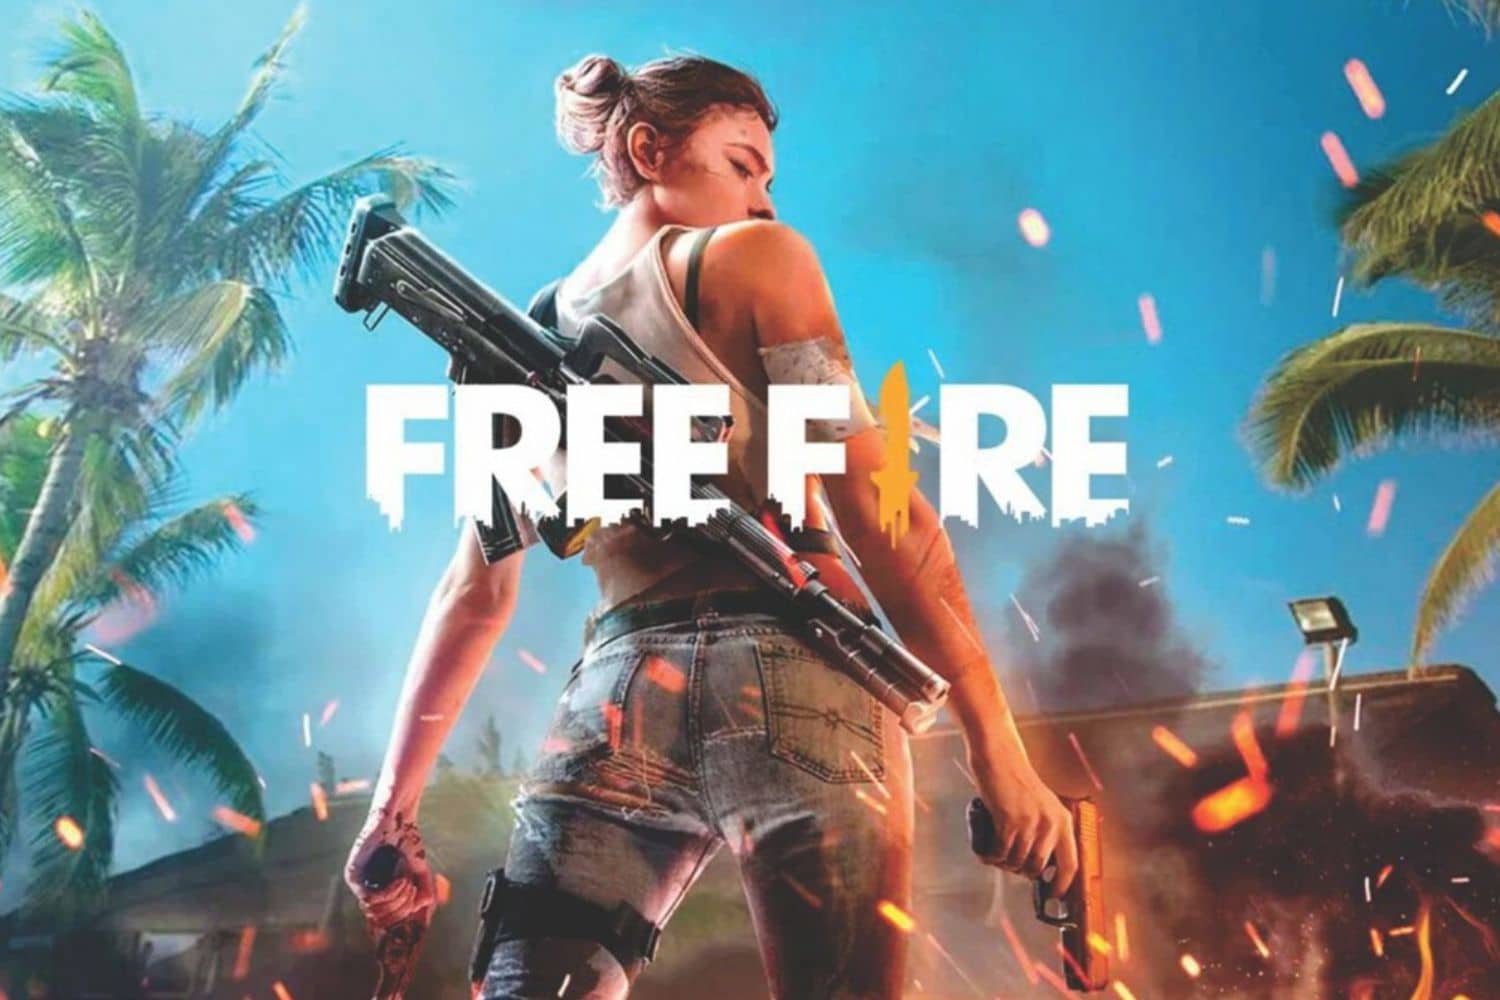 Garena Free Fire Will Bans Players That Plays With Cheater or Hacker! –  Roonby